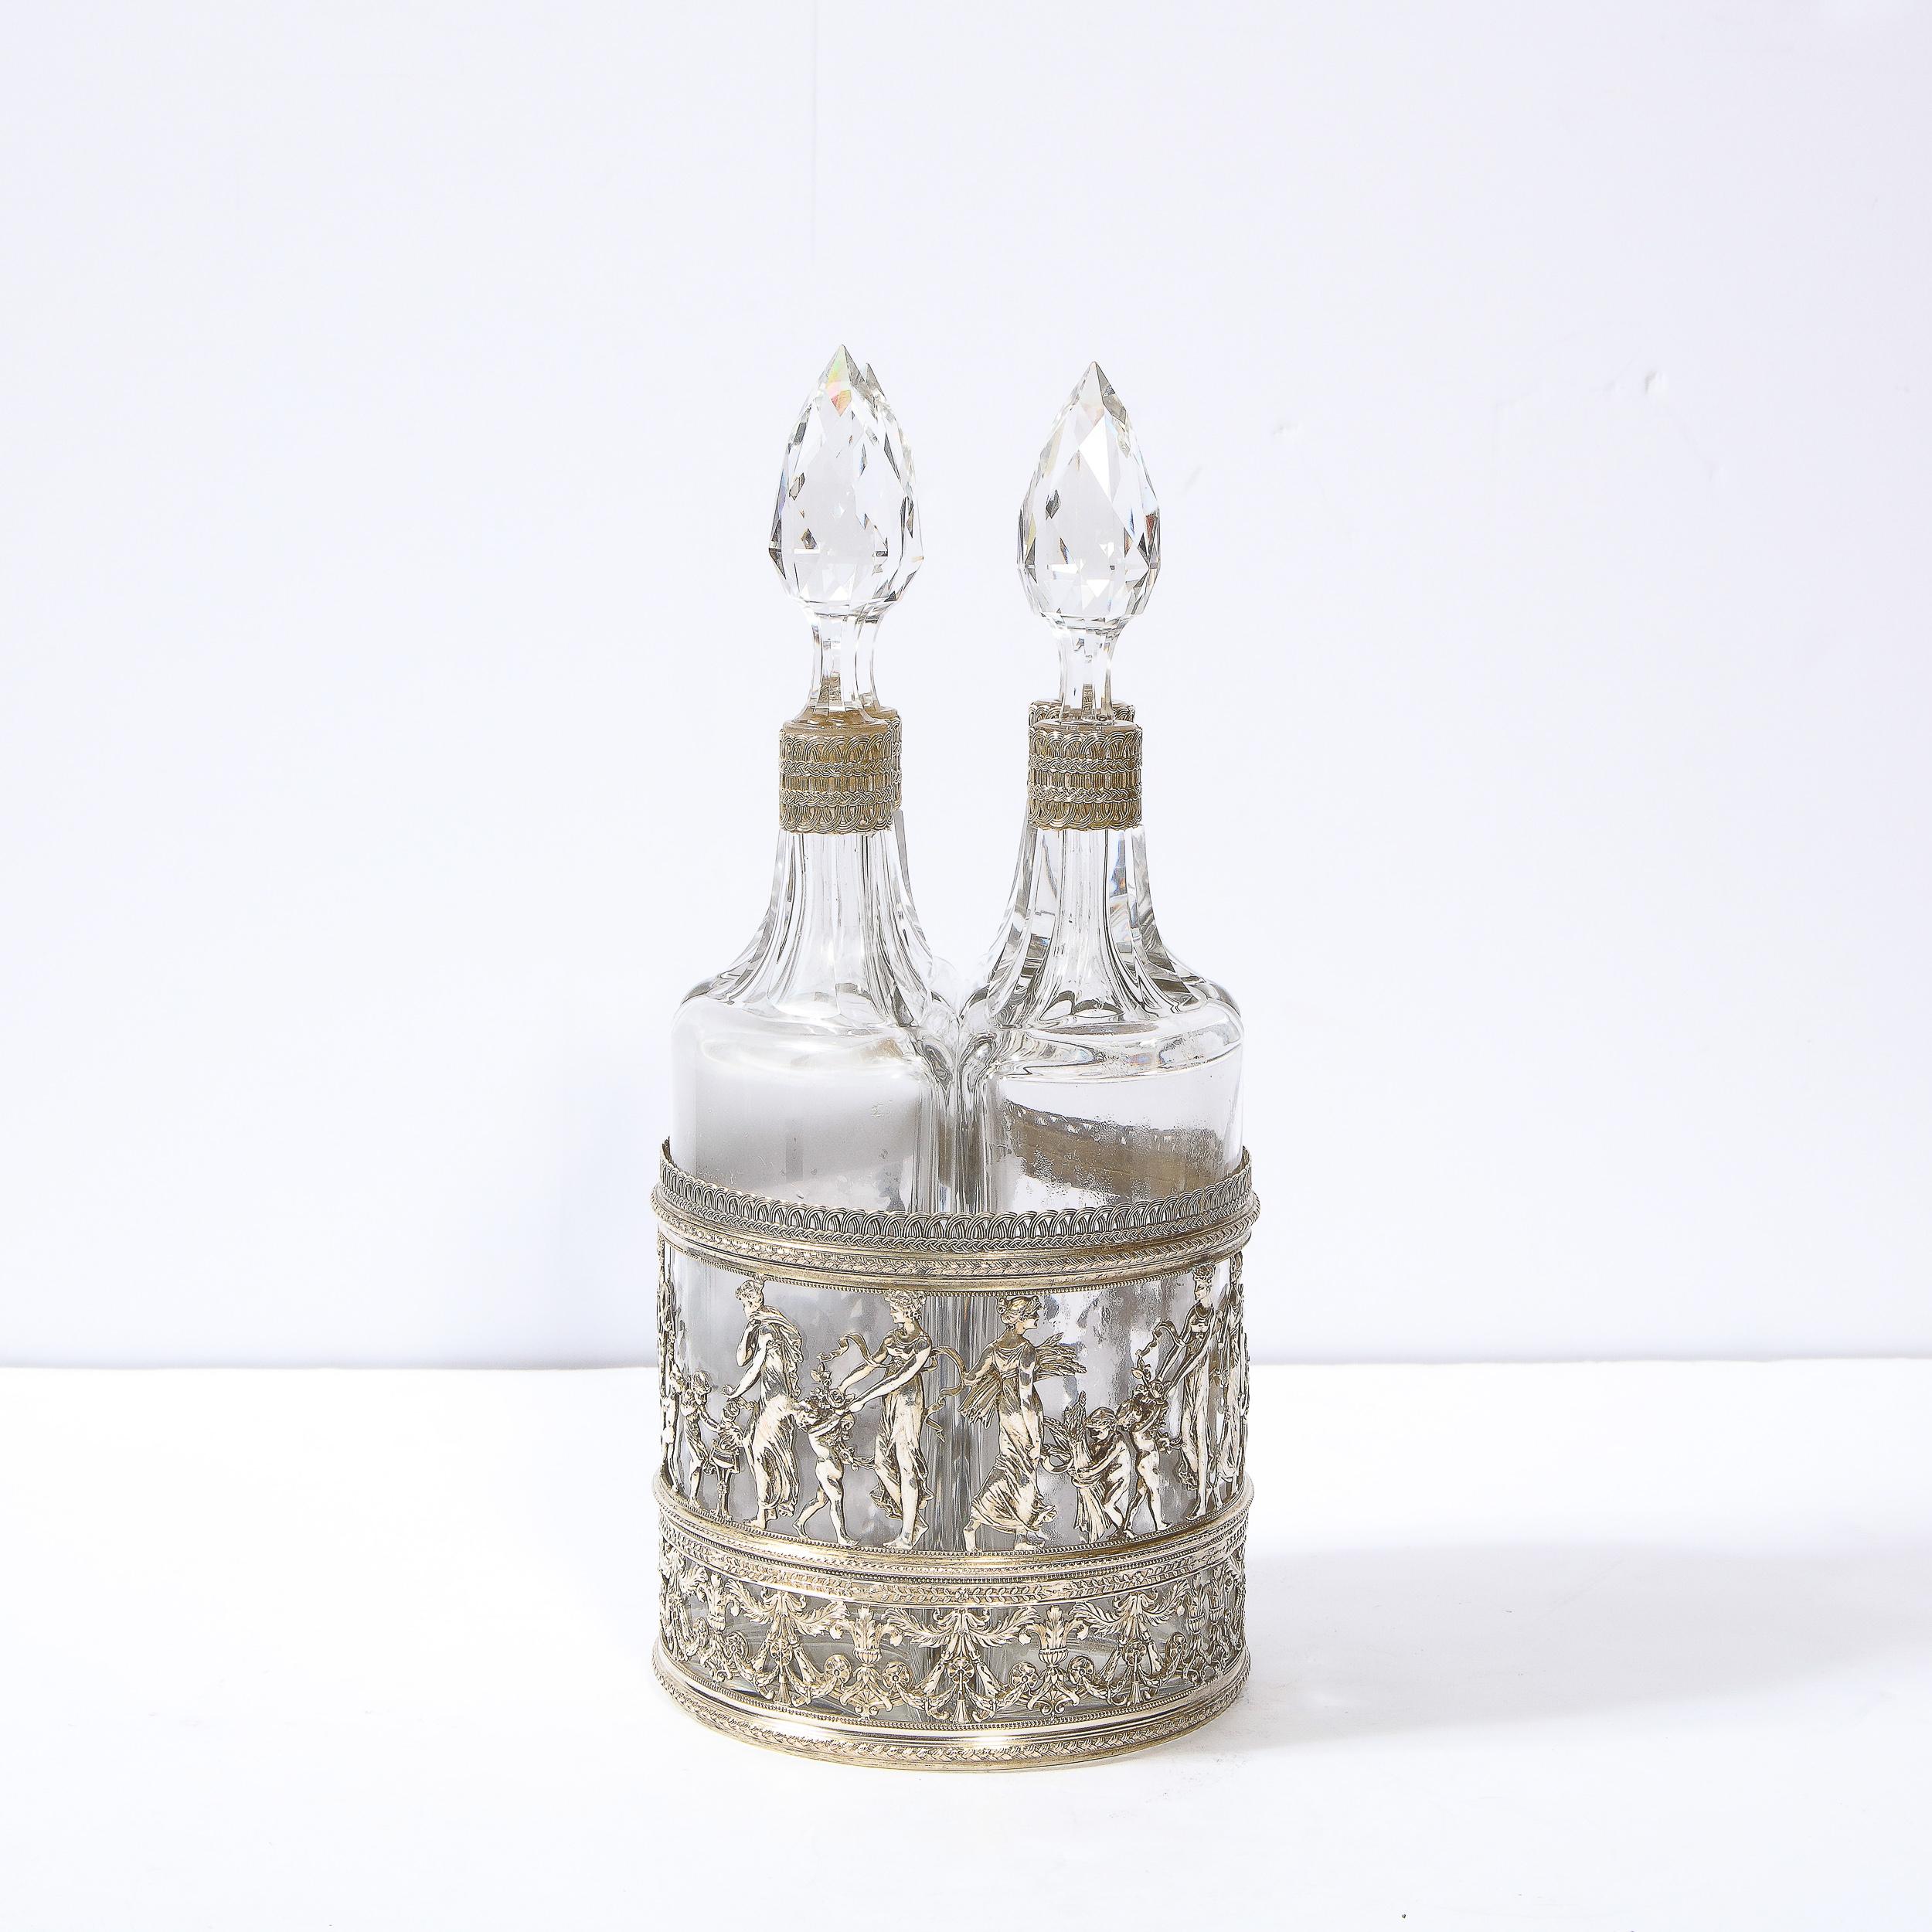 English 19th Century Neoclassical Figurative Silver Plate & Cut Crystal Decanter Set For Sale